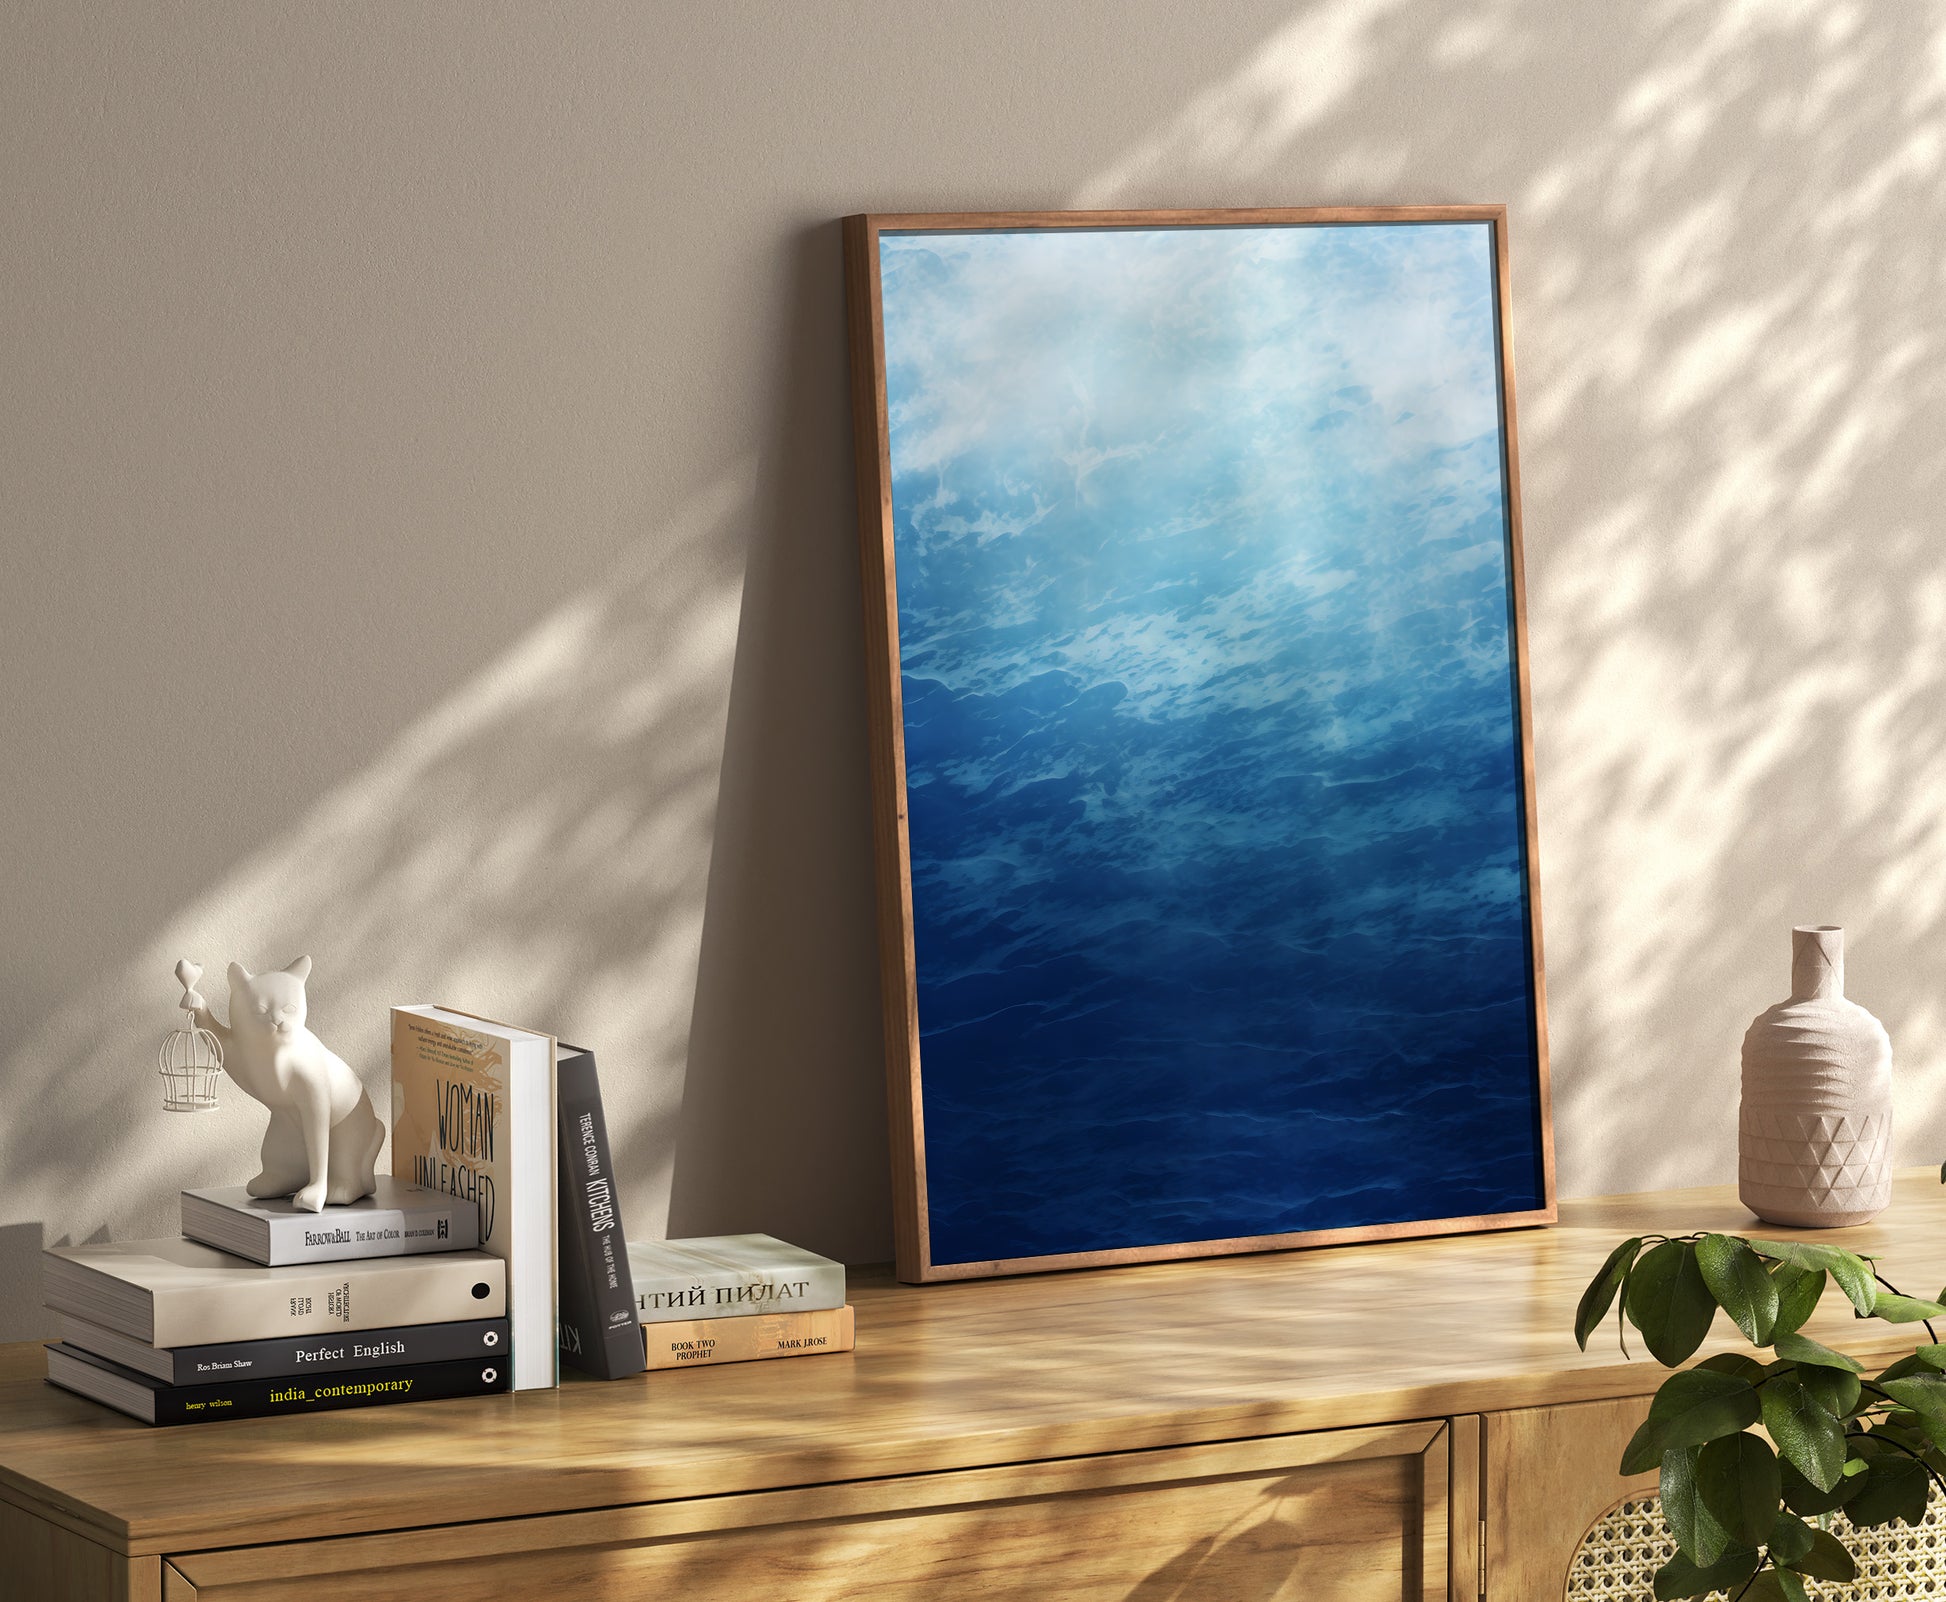 A framed painting of a blue sky leaning against a wall beside books and decor.